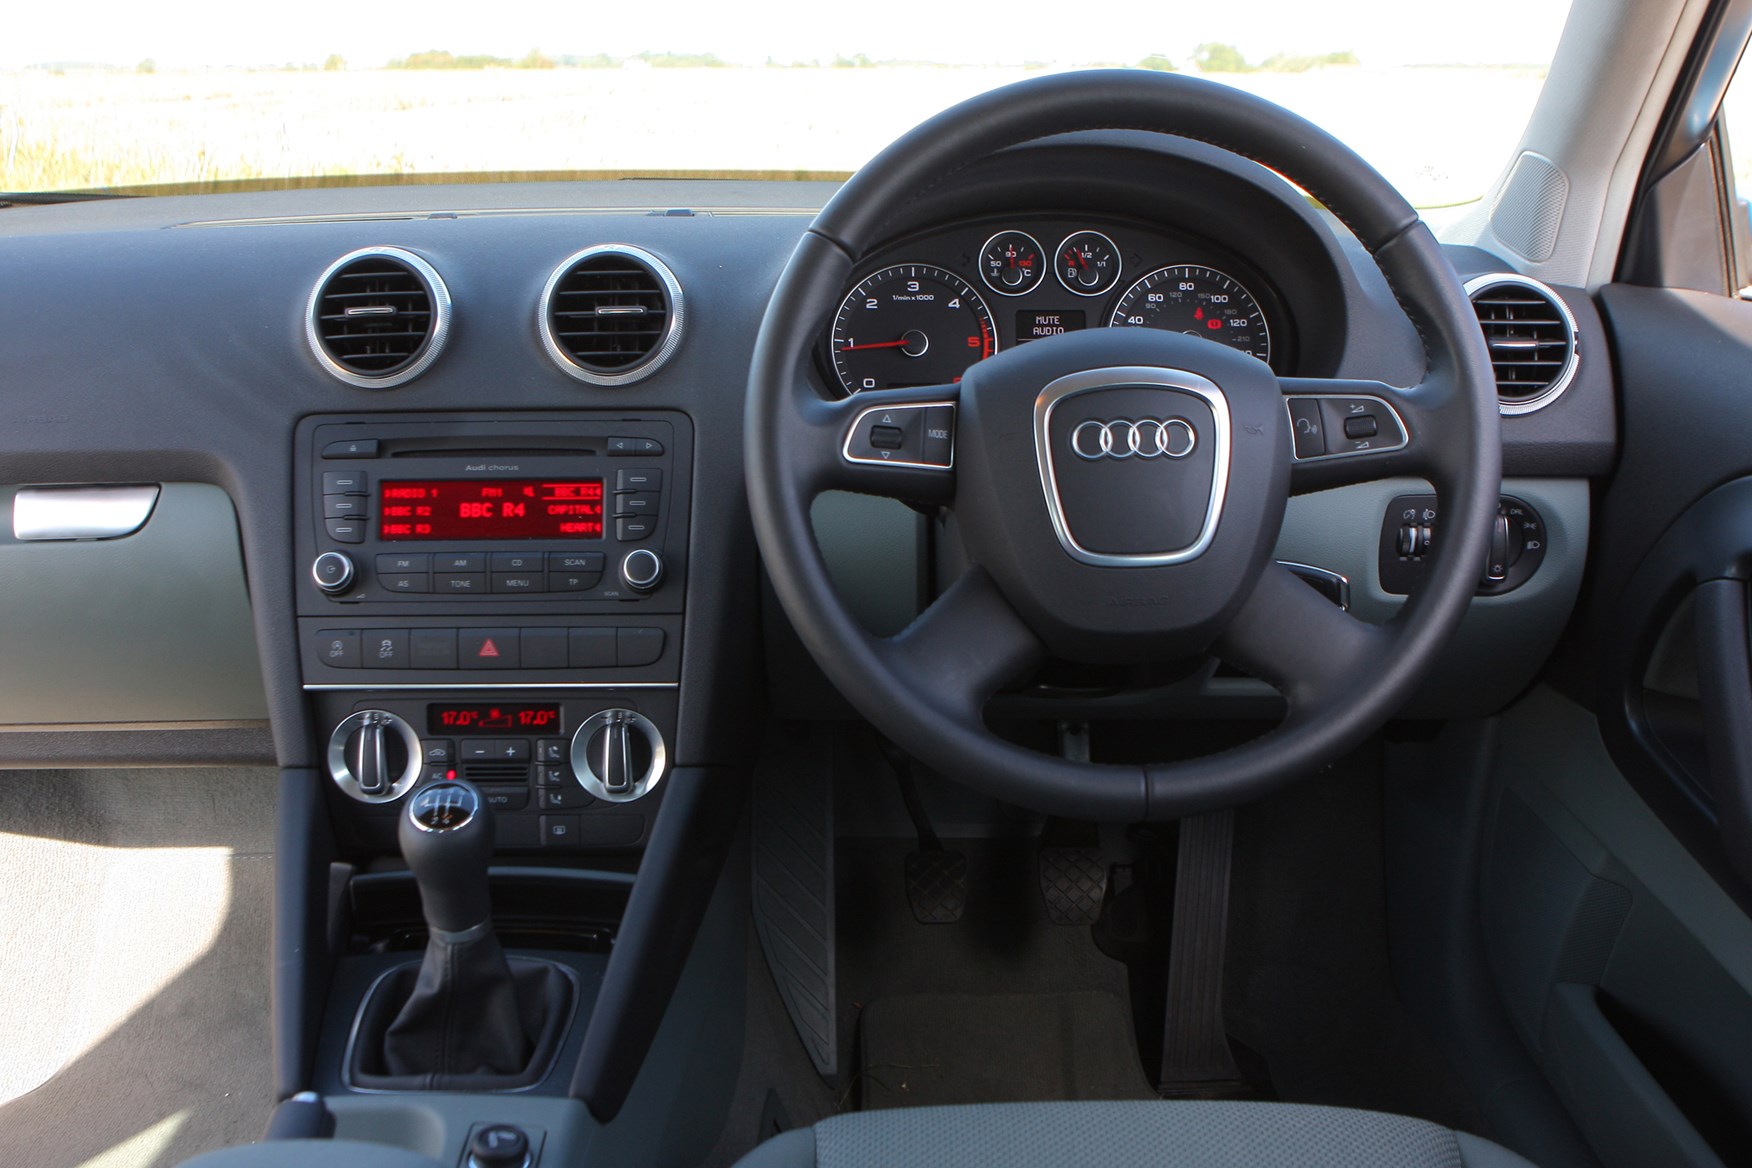 Exchangeable team Structurally Used Audi A3 Hatchback (2003 - 2012) interior, tech and comfort | Parkers